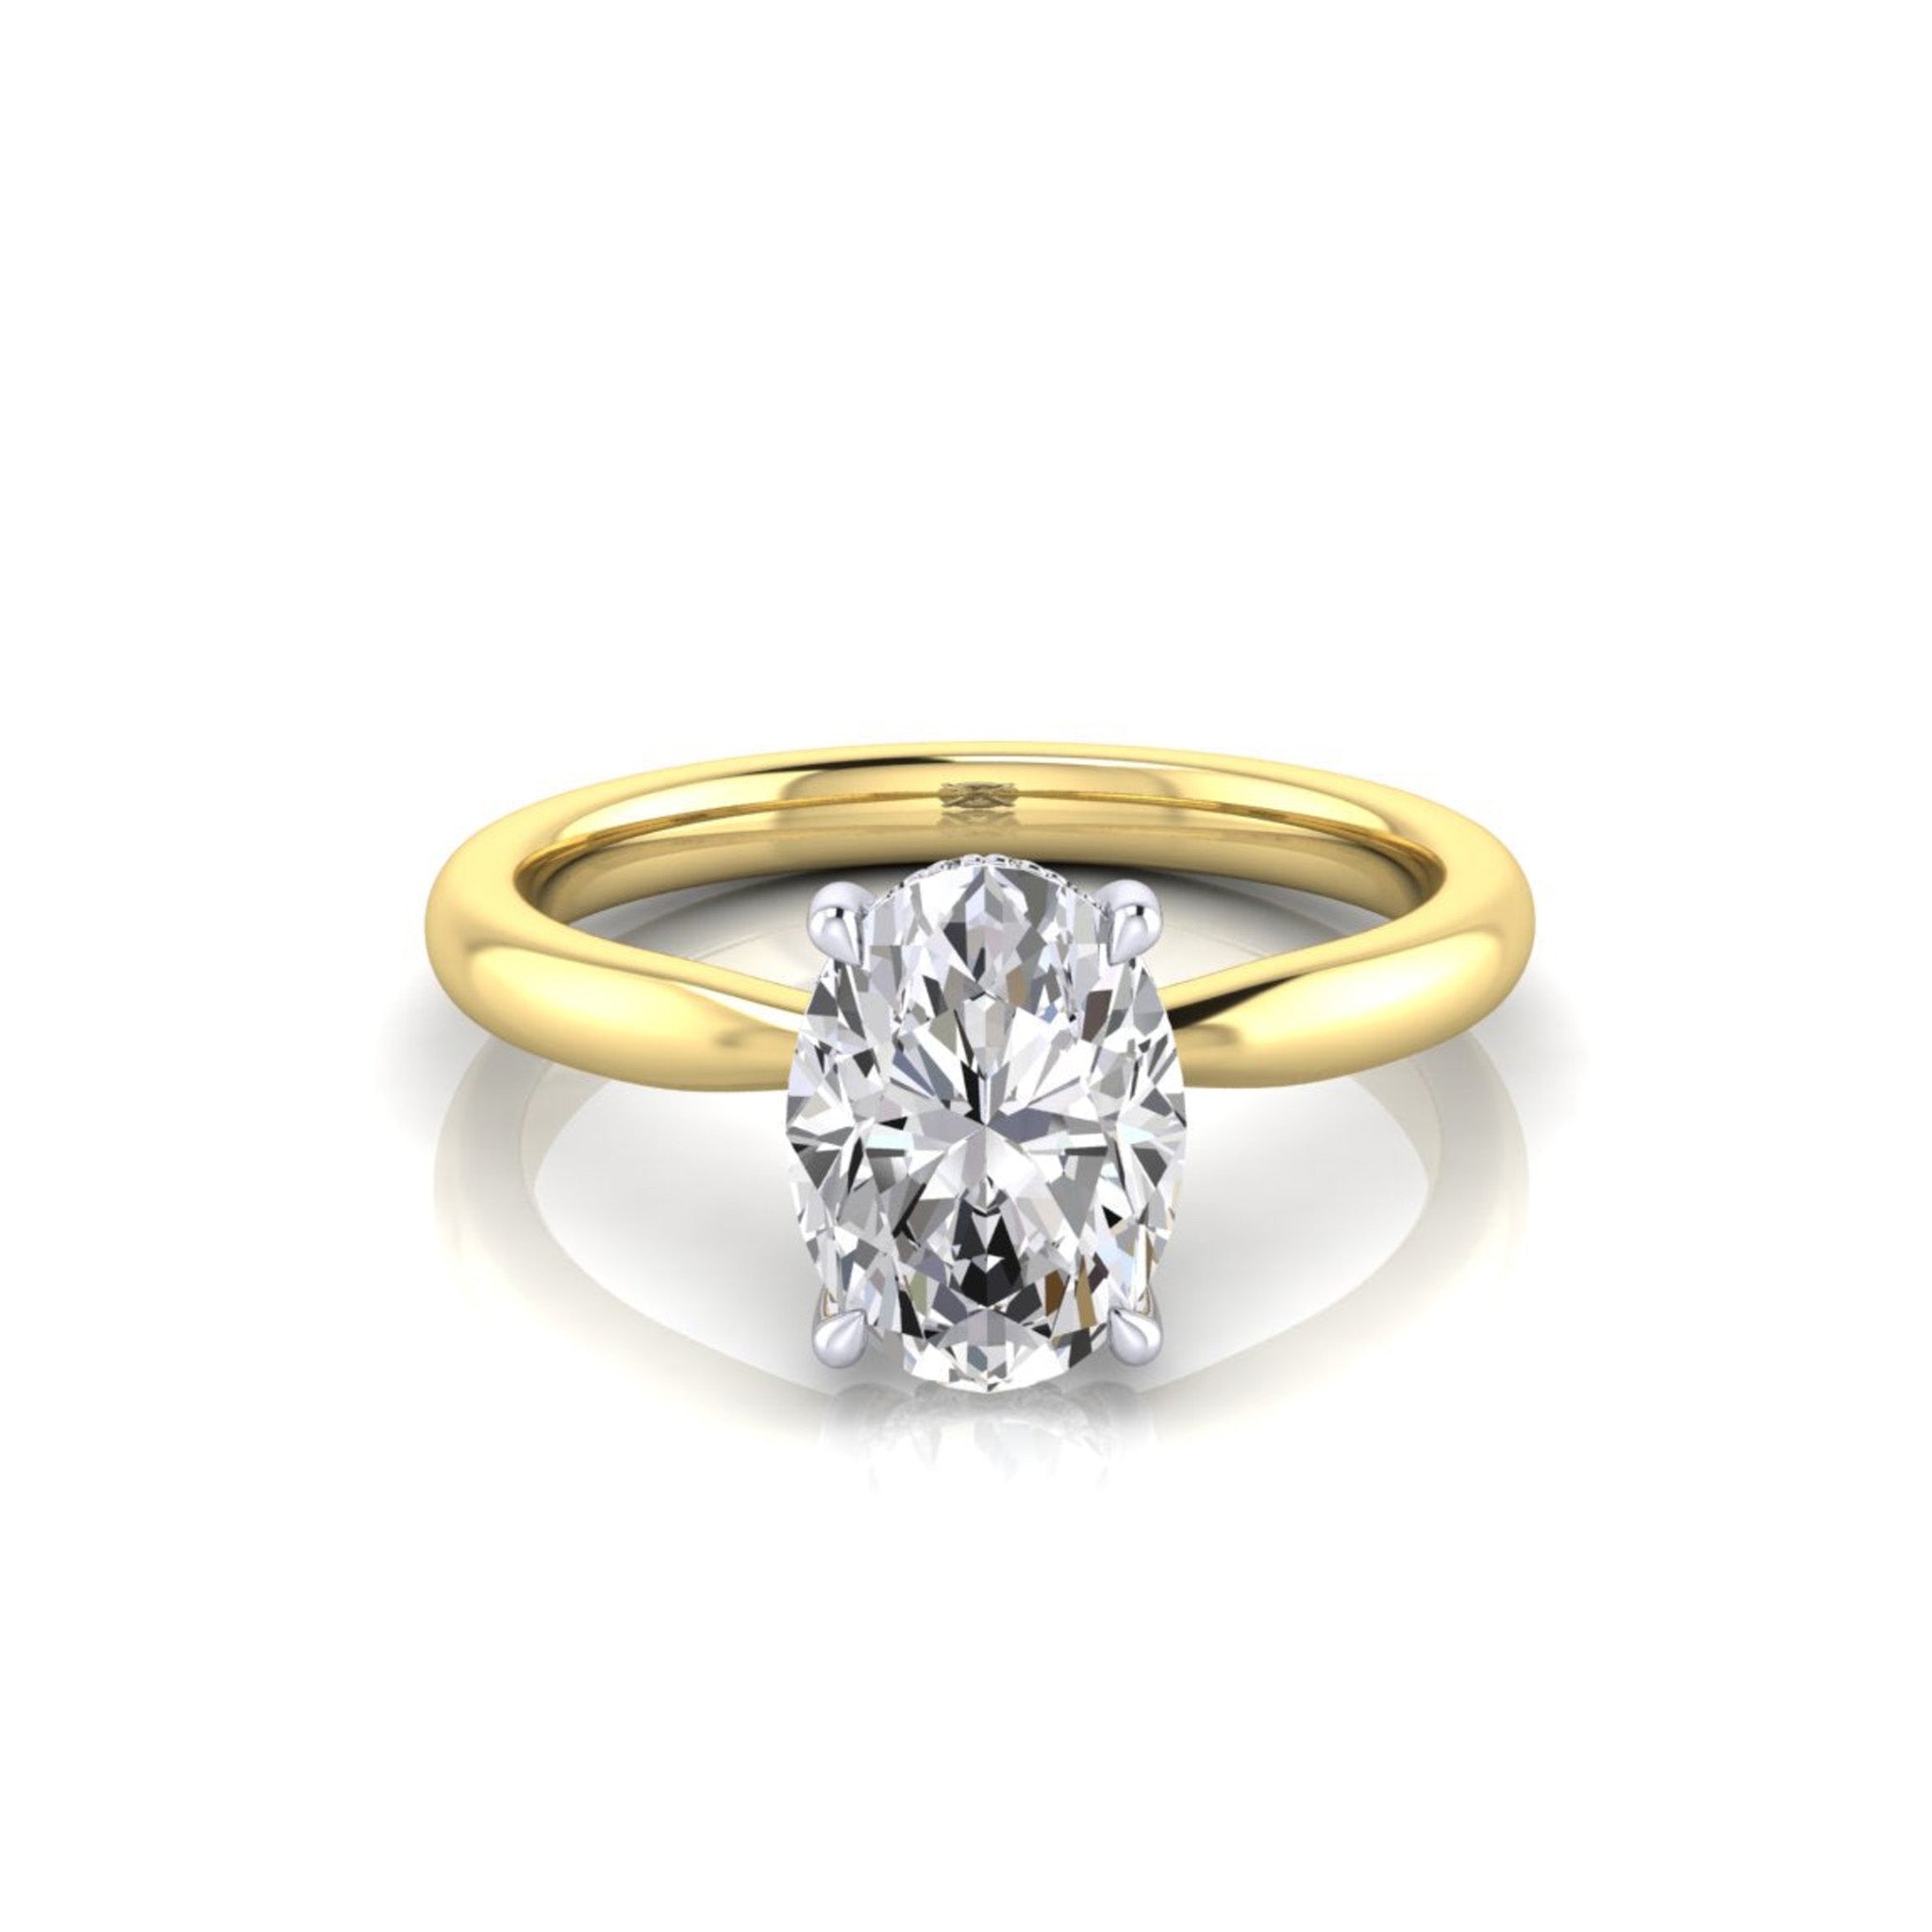 Ainslie Oval Diamond Solitaire 4 Claw Ring